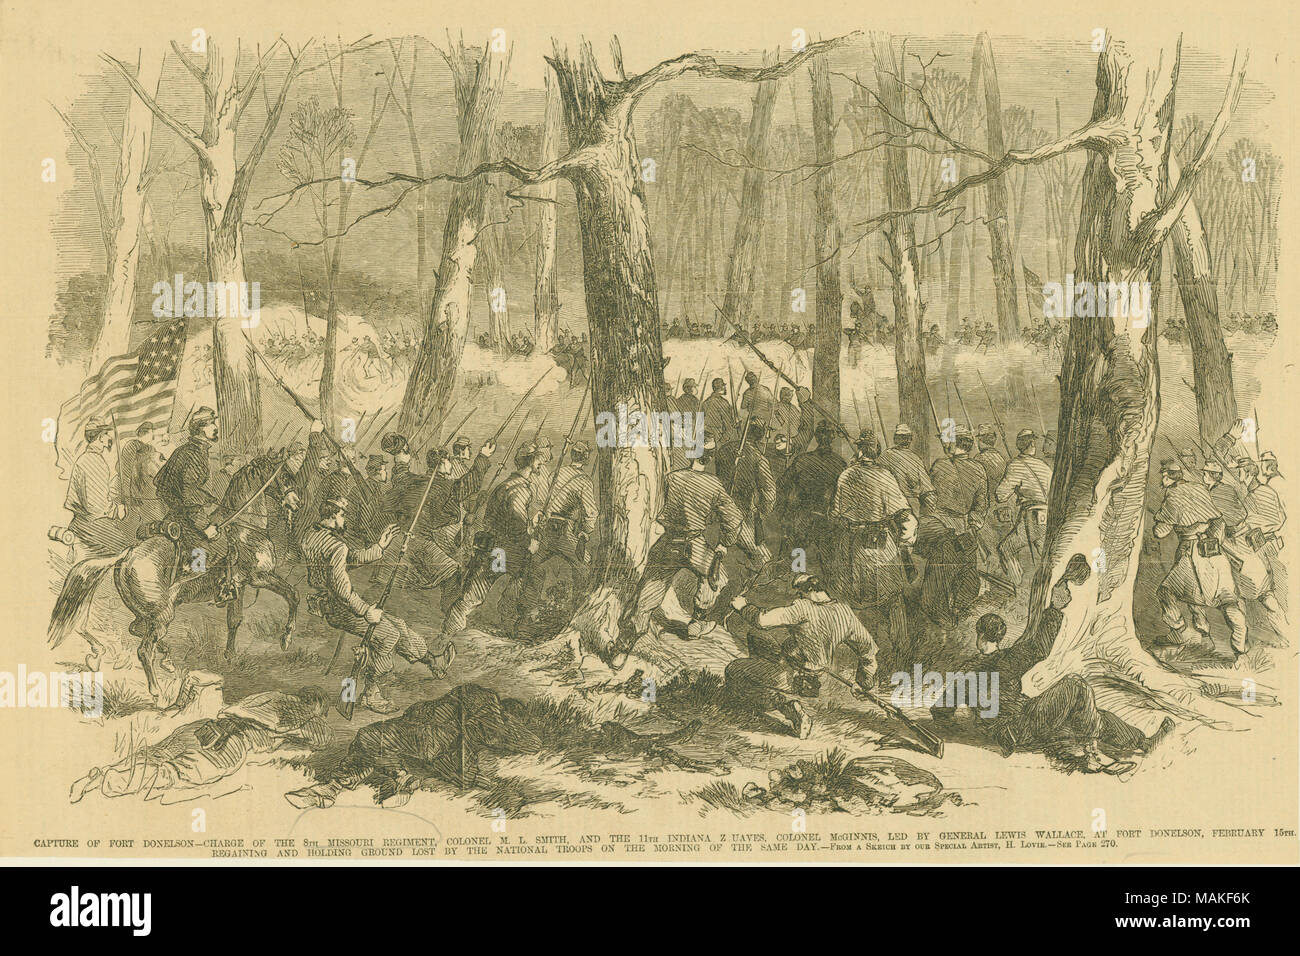 'Capture Of Fort Donelson. Charge of The 8th Missouri Regiment, By Colonel M.L. Smith, And The 11th Indiana Zuaves, Colonel NcGinnis, Led By General Lewis Wallace, At Fort Donelson, February 15th.' Wood Engraving by H. Lovie, . Missouri History Museum Photograph and Prints collection. Civil War. P0084-1262. Stock Photo